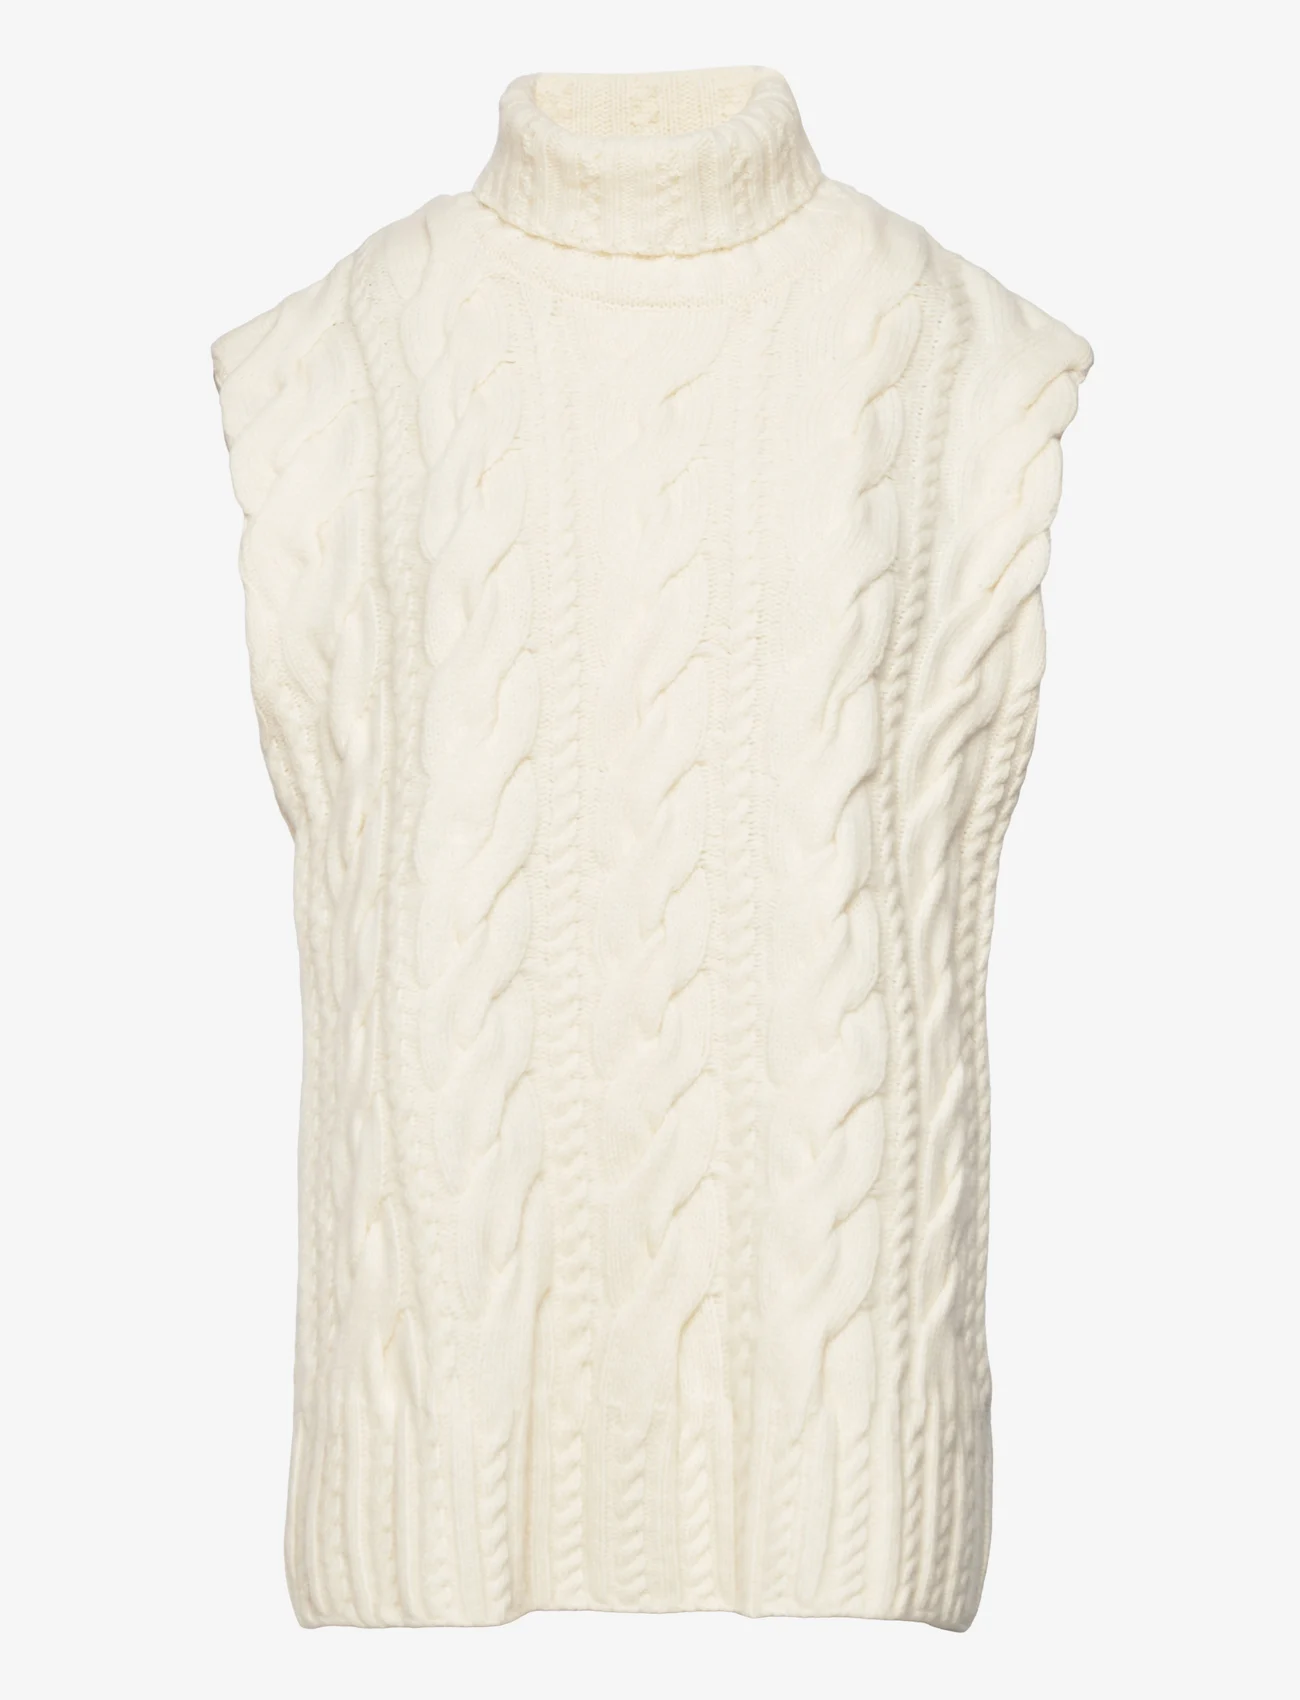 House Of Dagmar - Clare Vest - knitted vests - ivory - 0